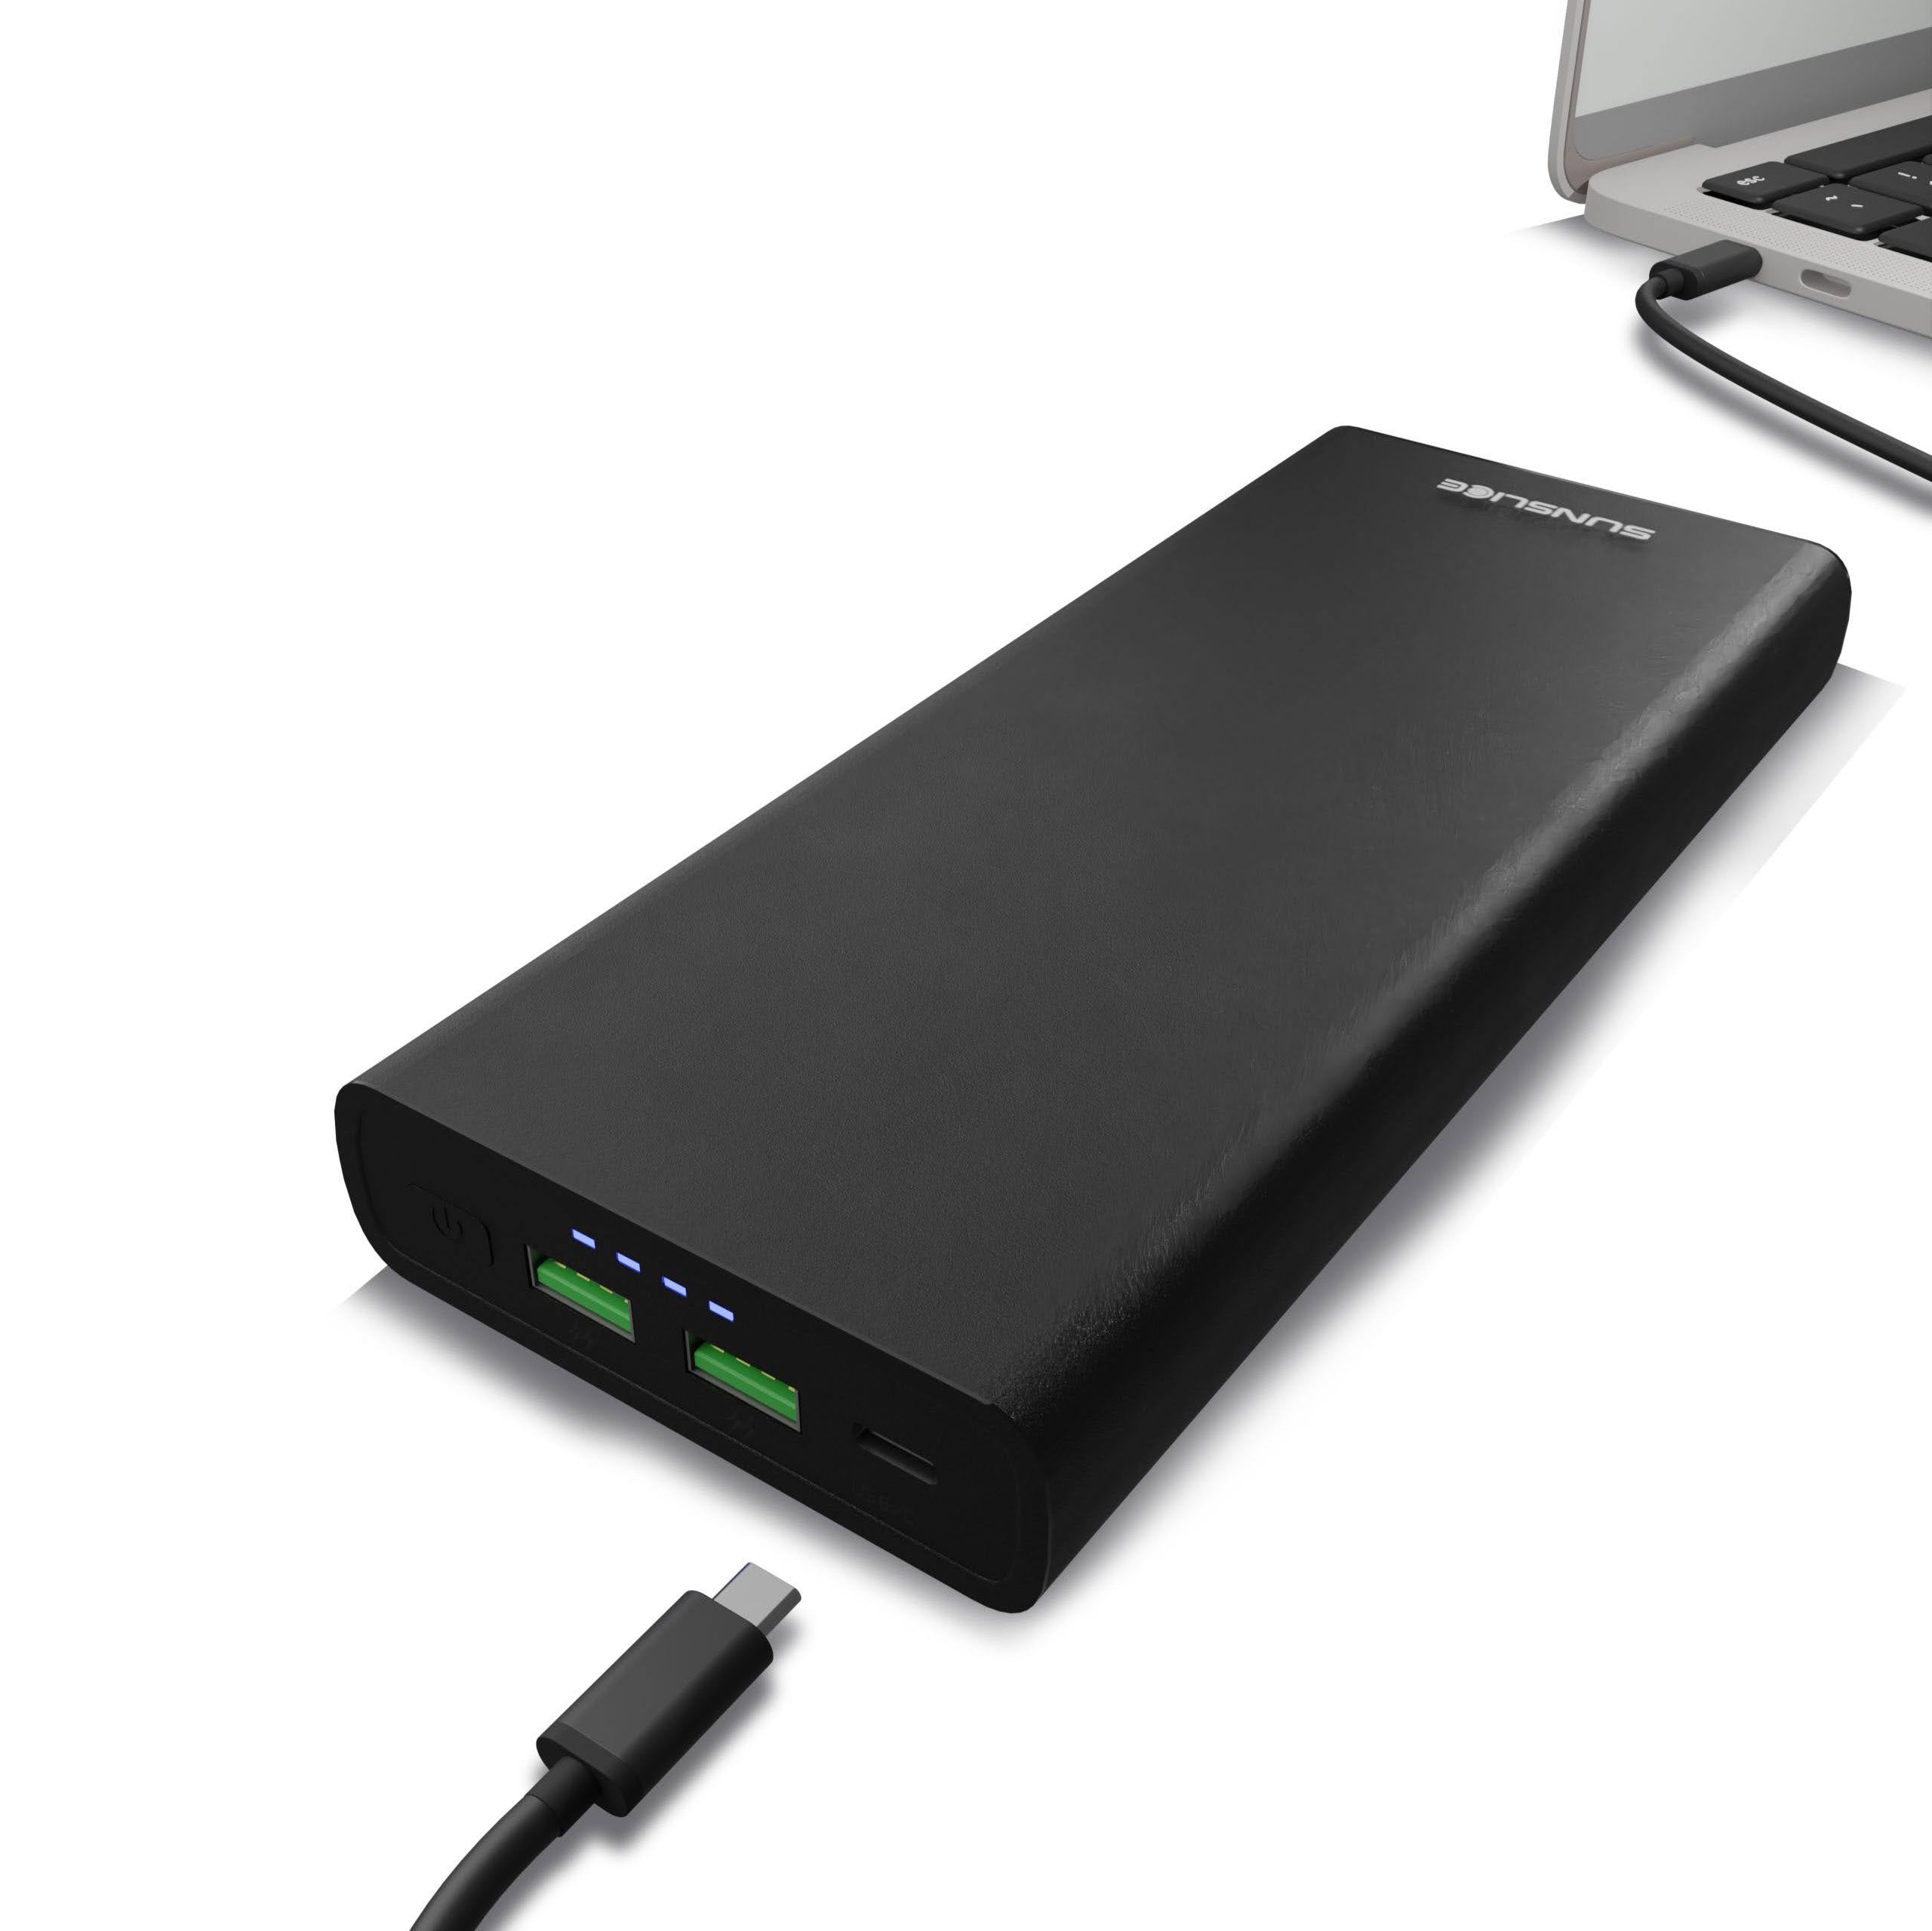 Charger for computer / Tablet / Ipad - Power Bank - External Lithium battery  for laptop / Ipad